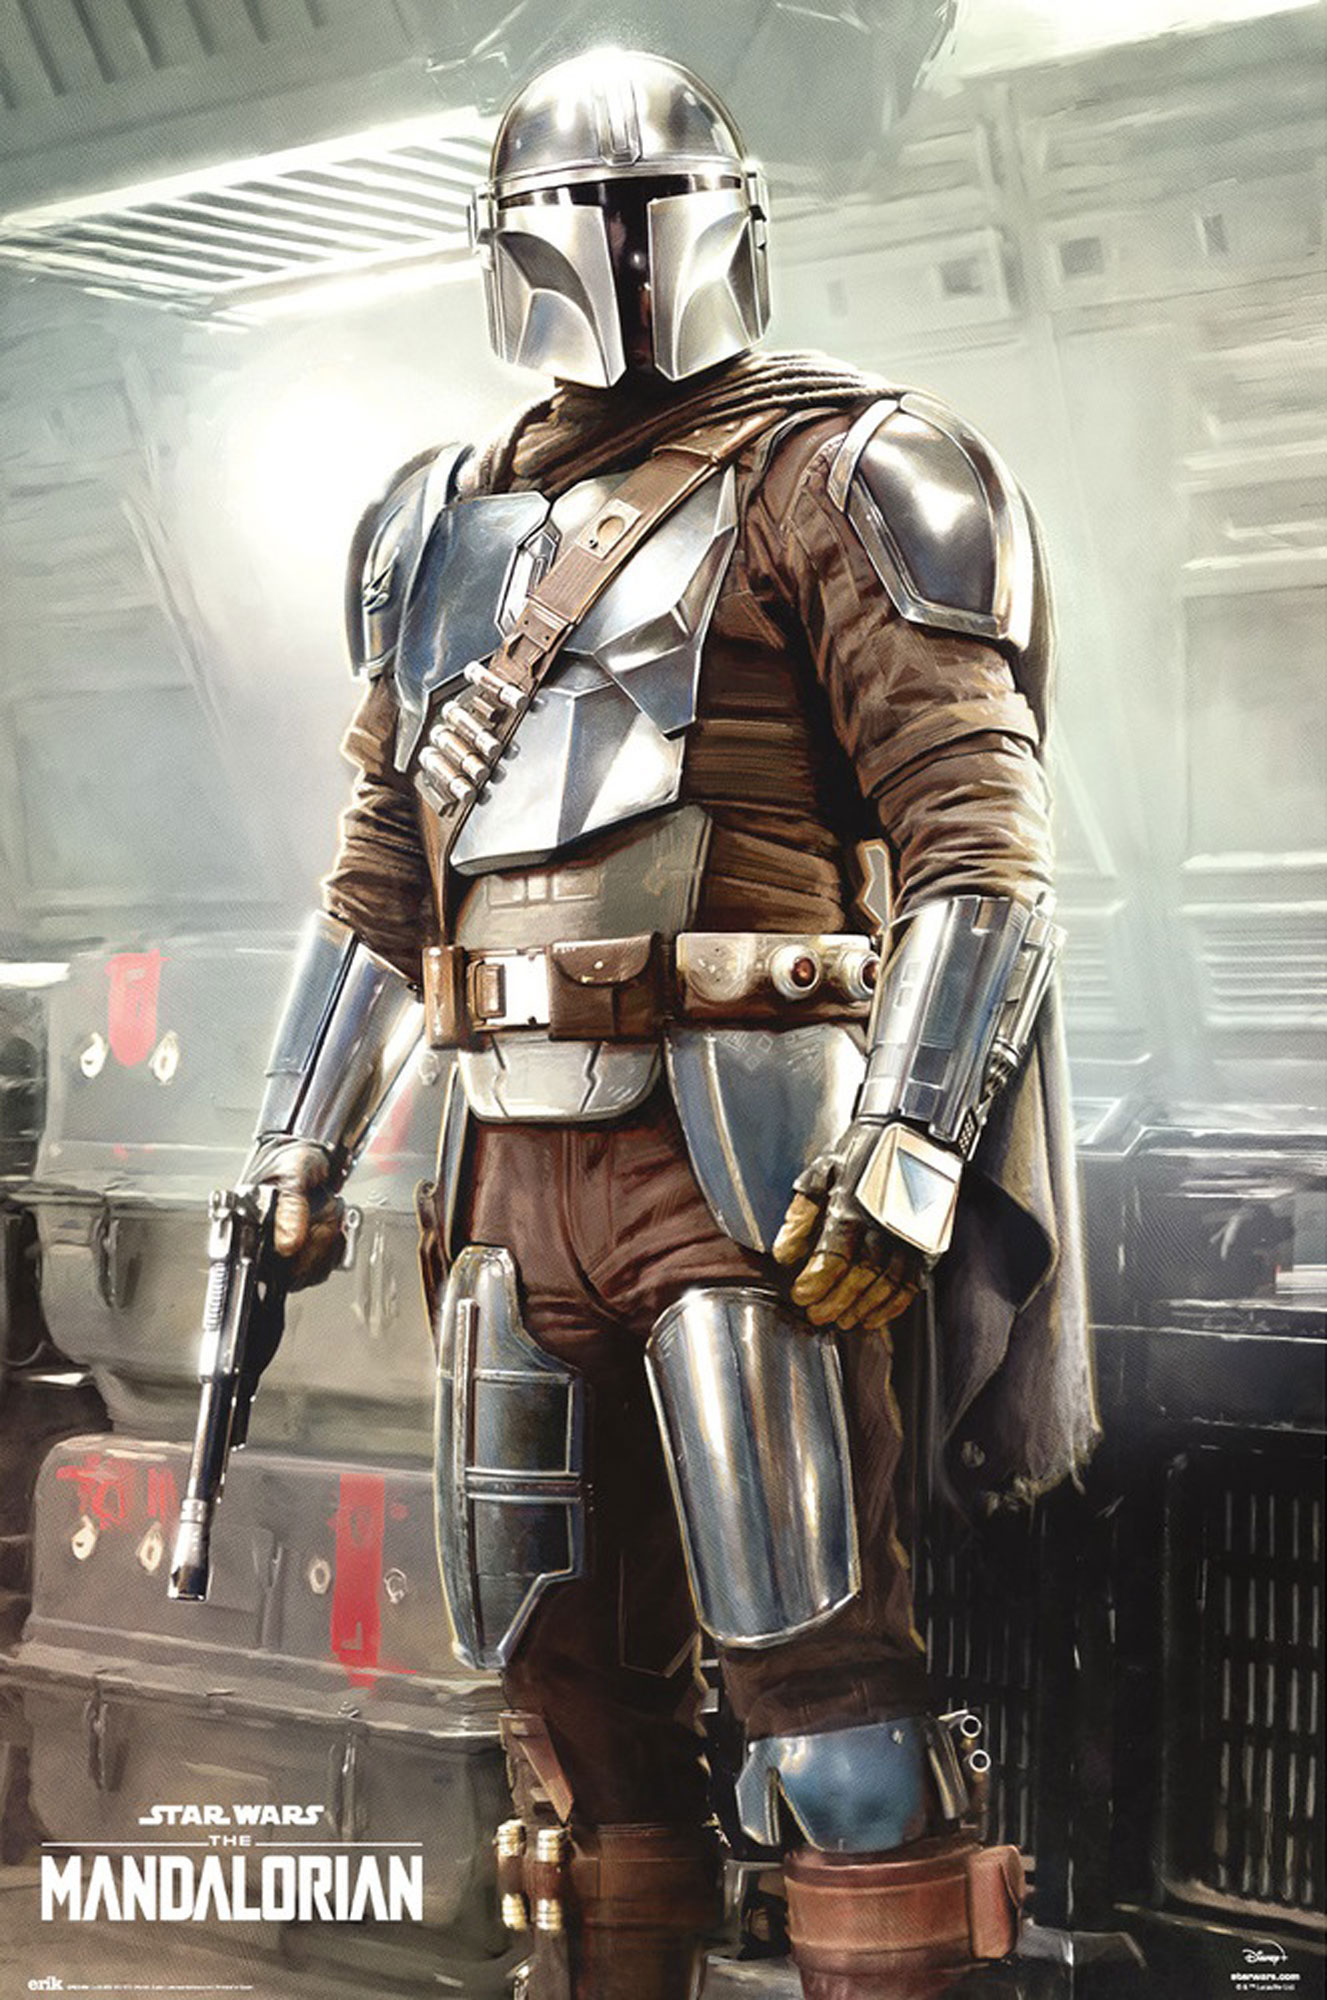 Star Wars Mandalorian Way the The is - - This